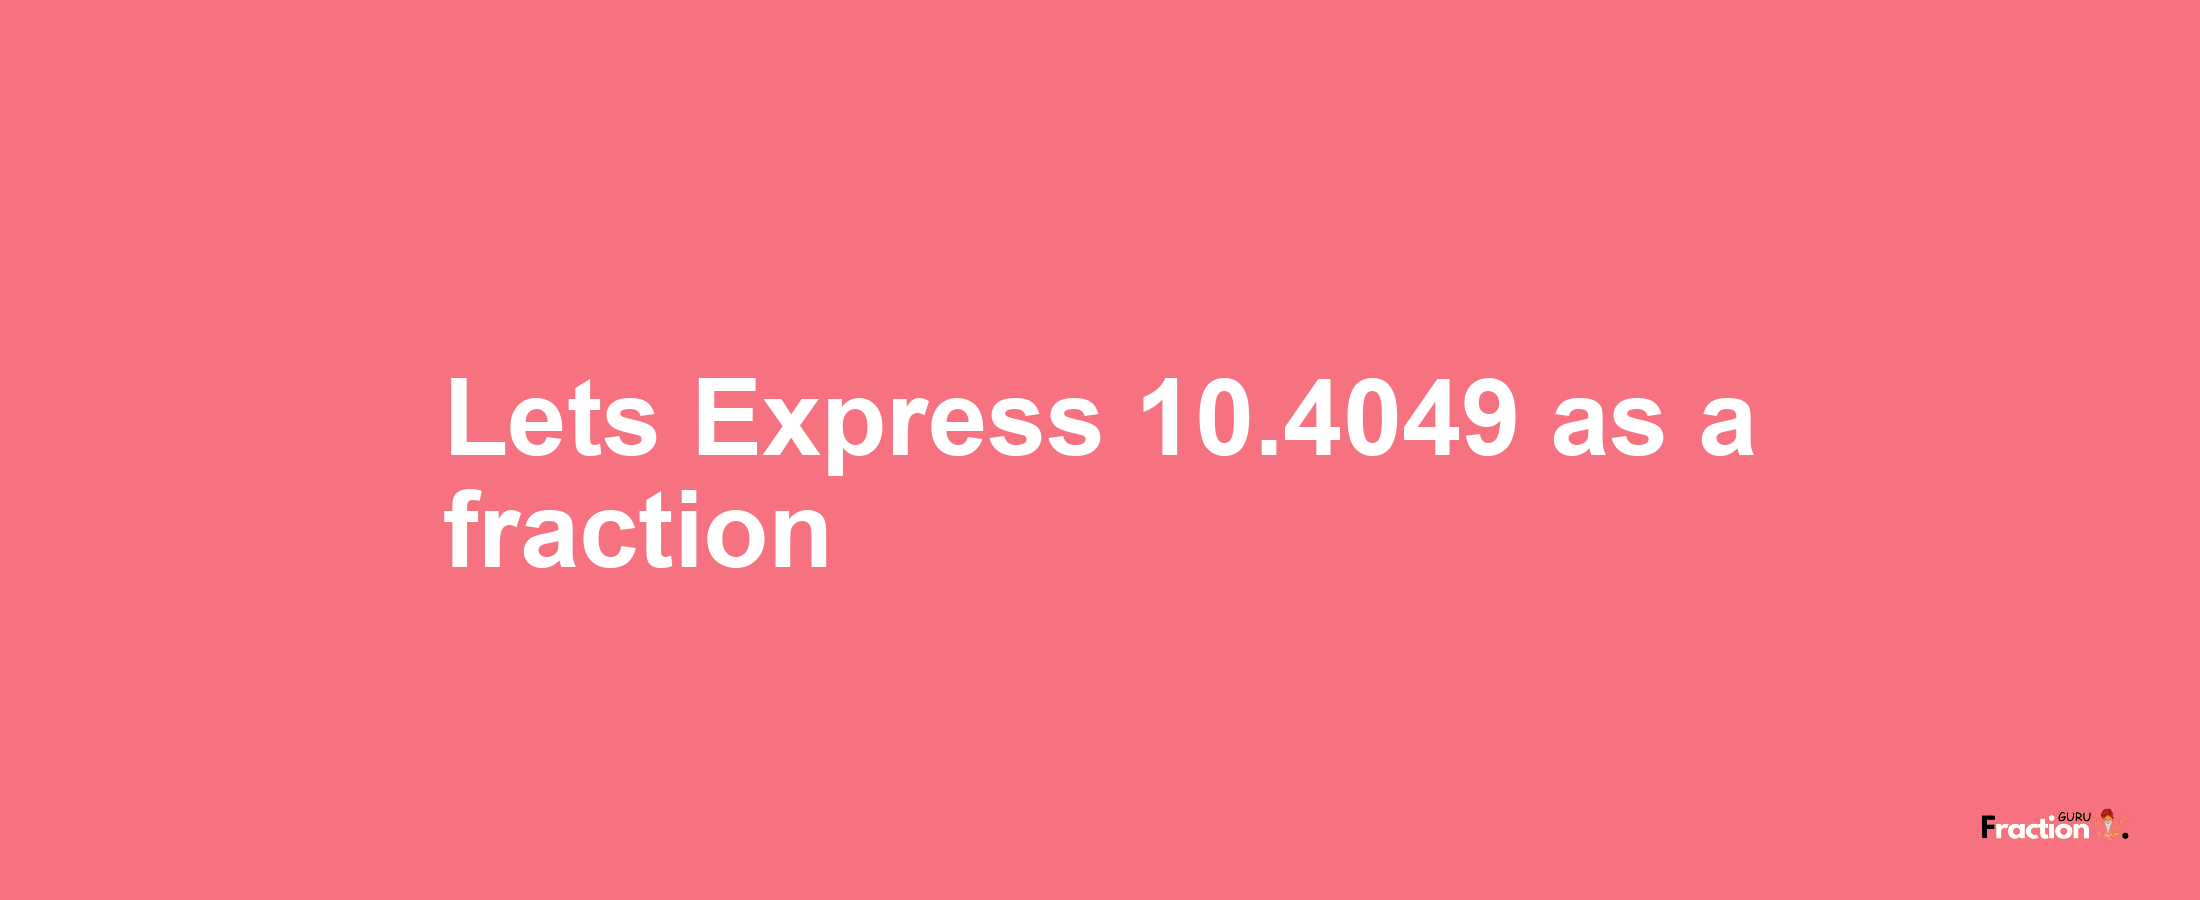 Lets Express 10.4049 as afraction